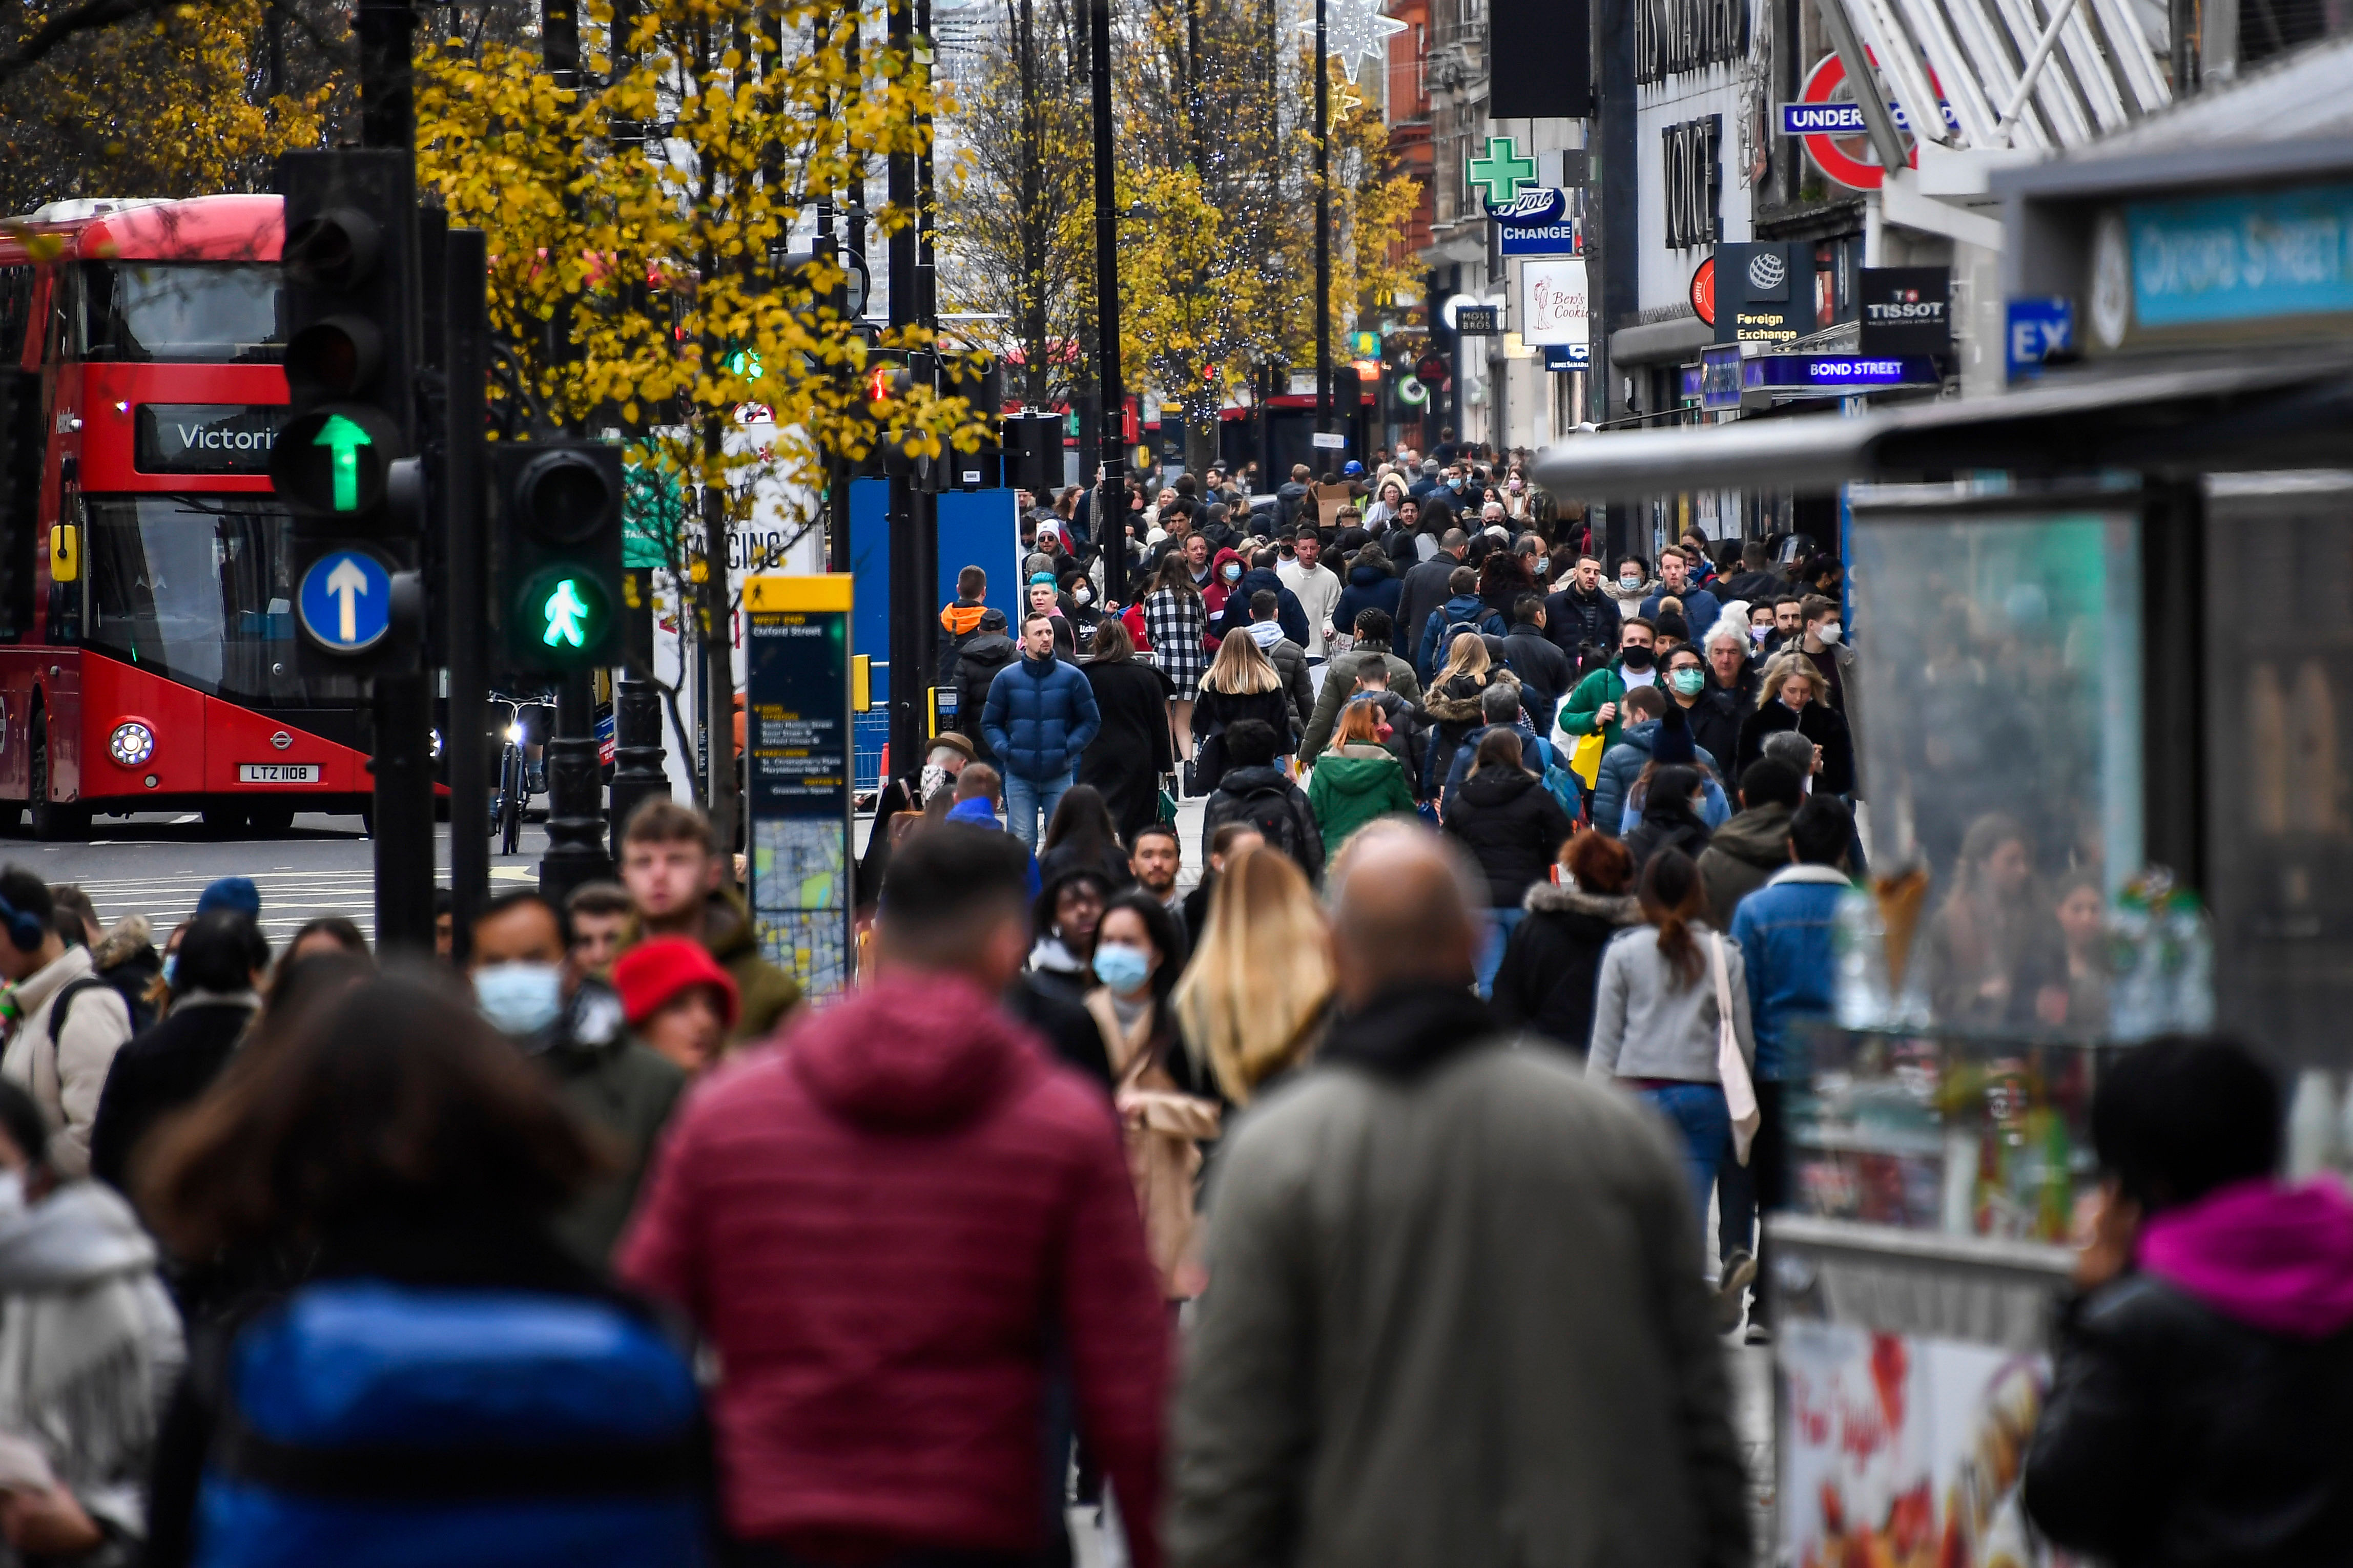 People walk in the main shopping area at Oxford Street, in London. Credit: AP Photo